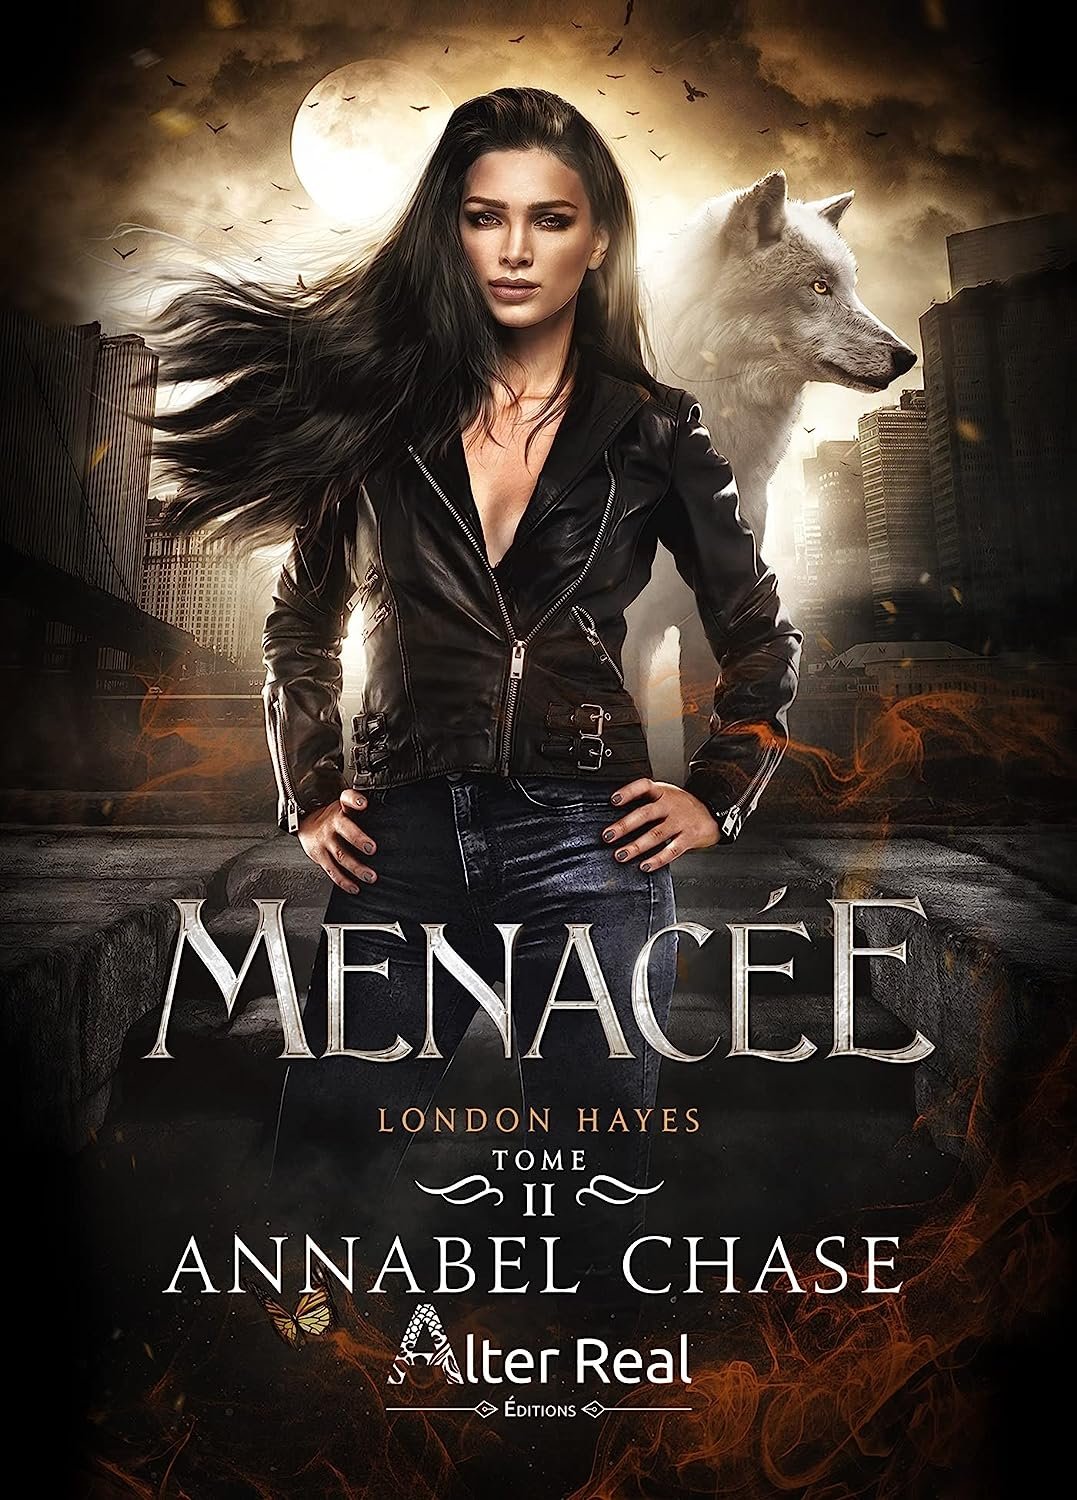 Annabel Chase - London Hayes, Tome 2 : Menacée